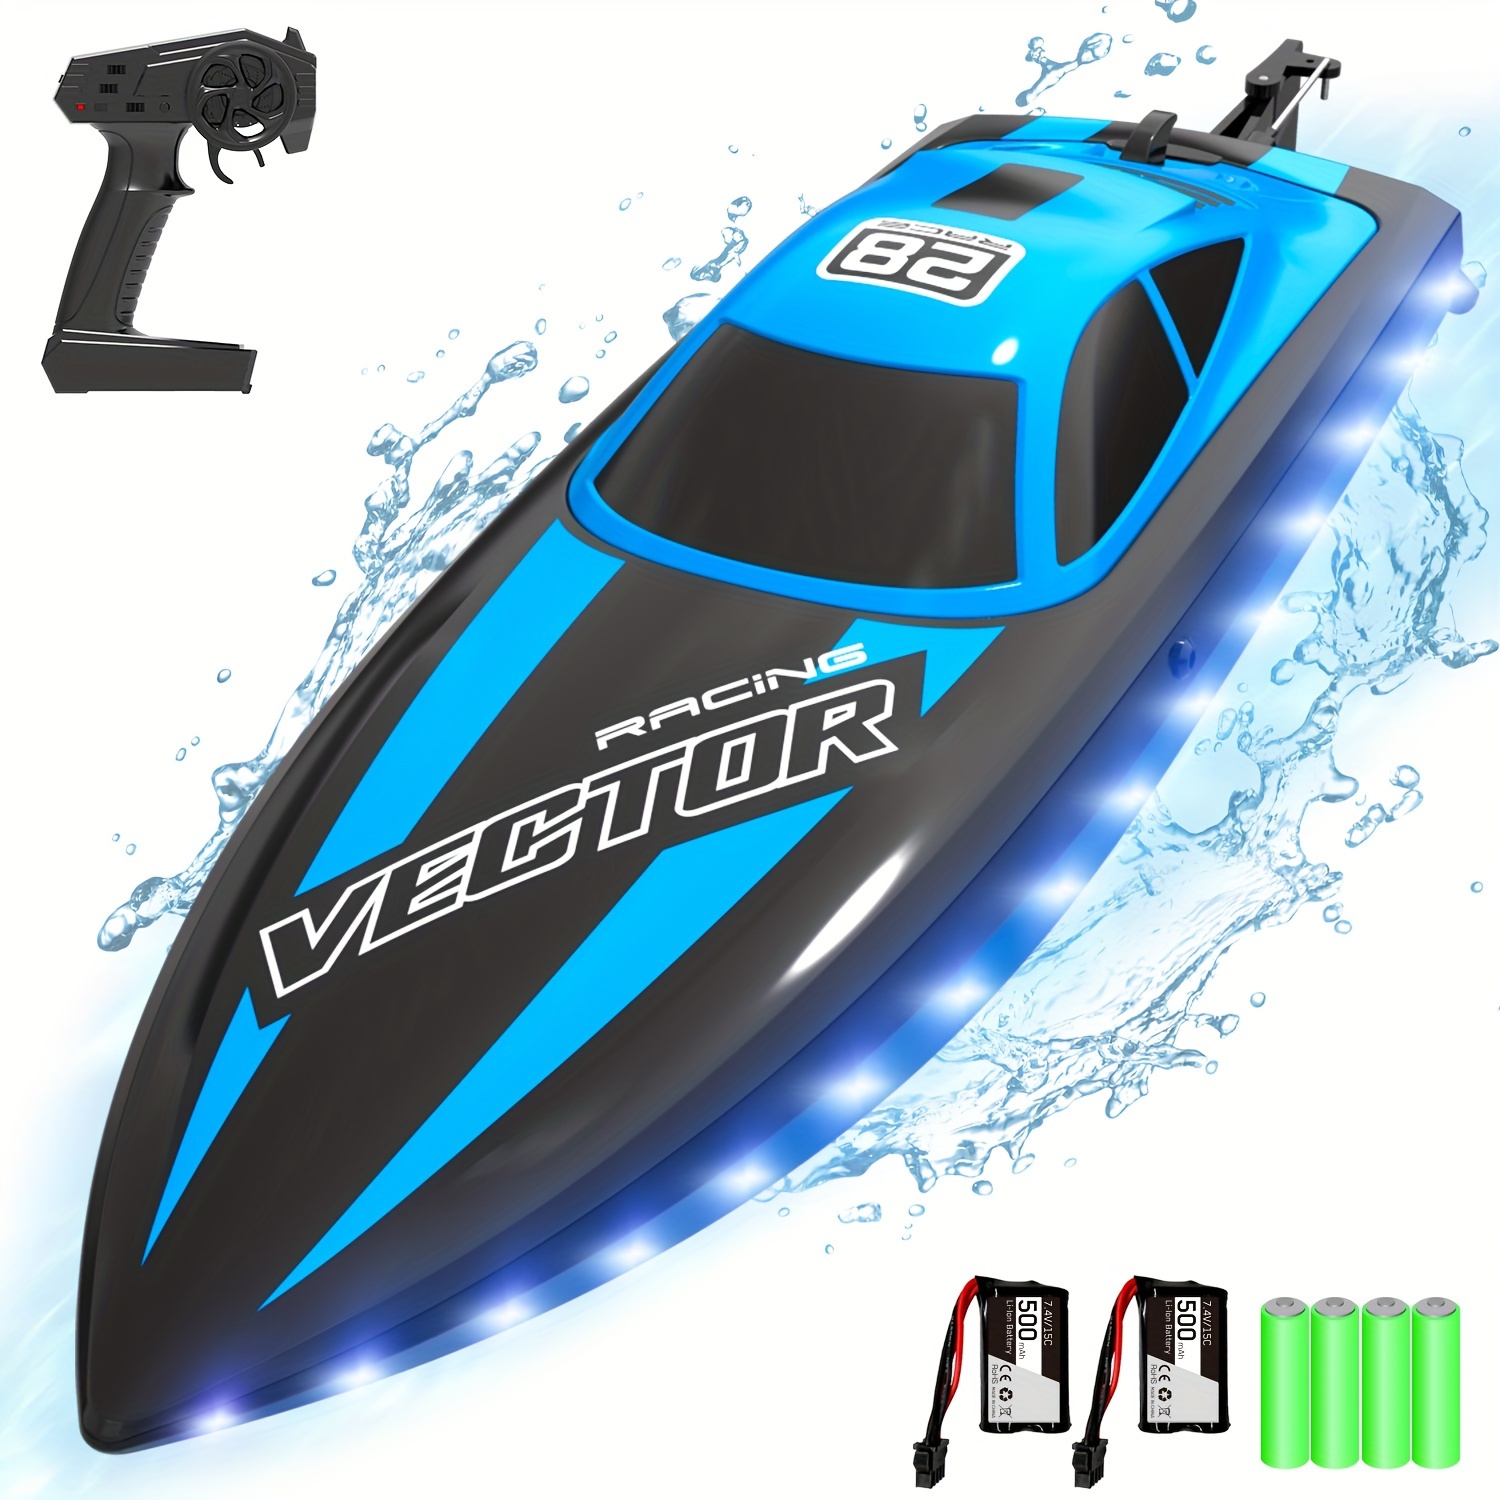 

Volantexrc Rc Boat 20mph Fast Remote Control Boat With Lights 2.4ghz Toy Boat For Pools And Lakes With 2 Rechargeable Batteries Toys Gifts For Boys Girls, Blue